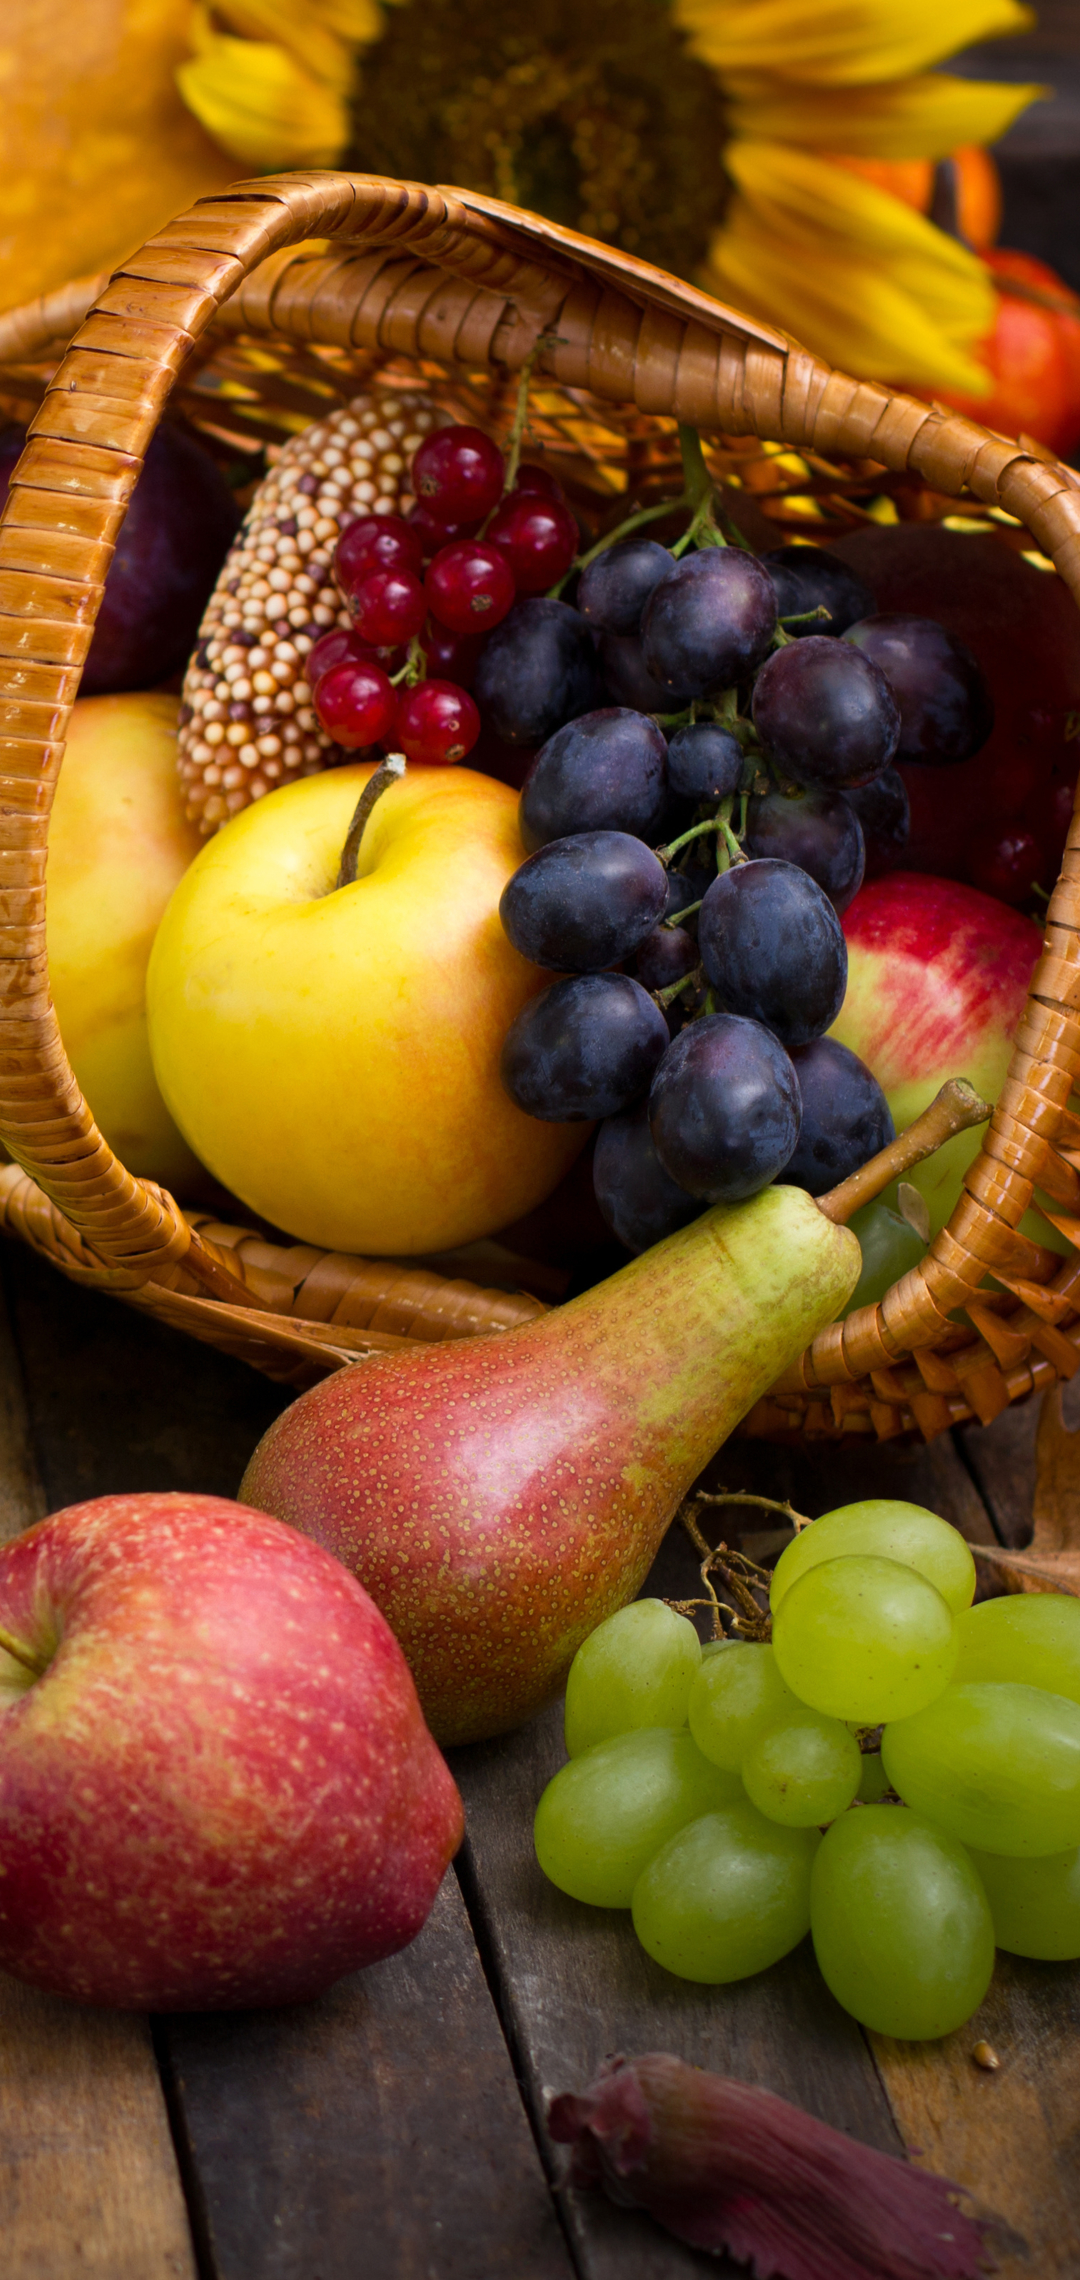 harvest, food, still life, pear, fall, apple, grapes cell phone wallpapers